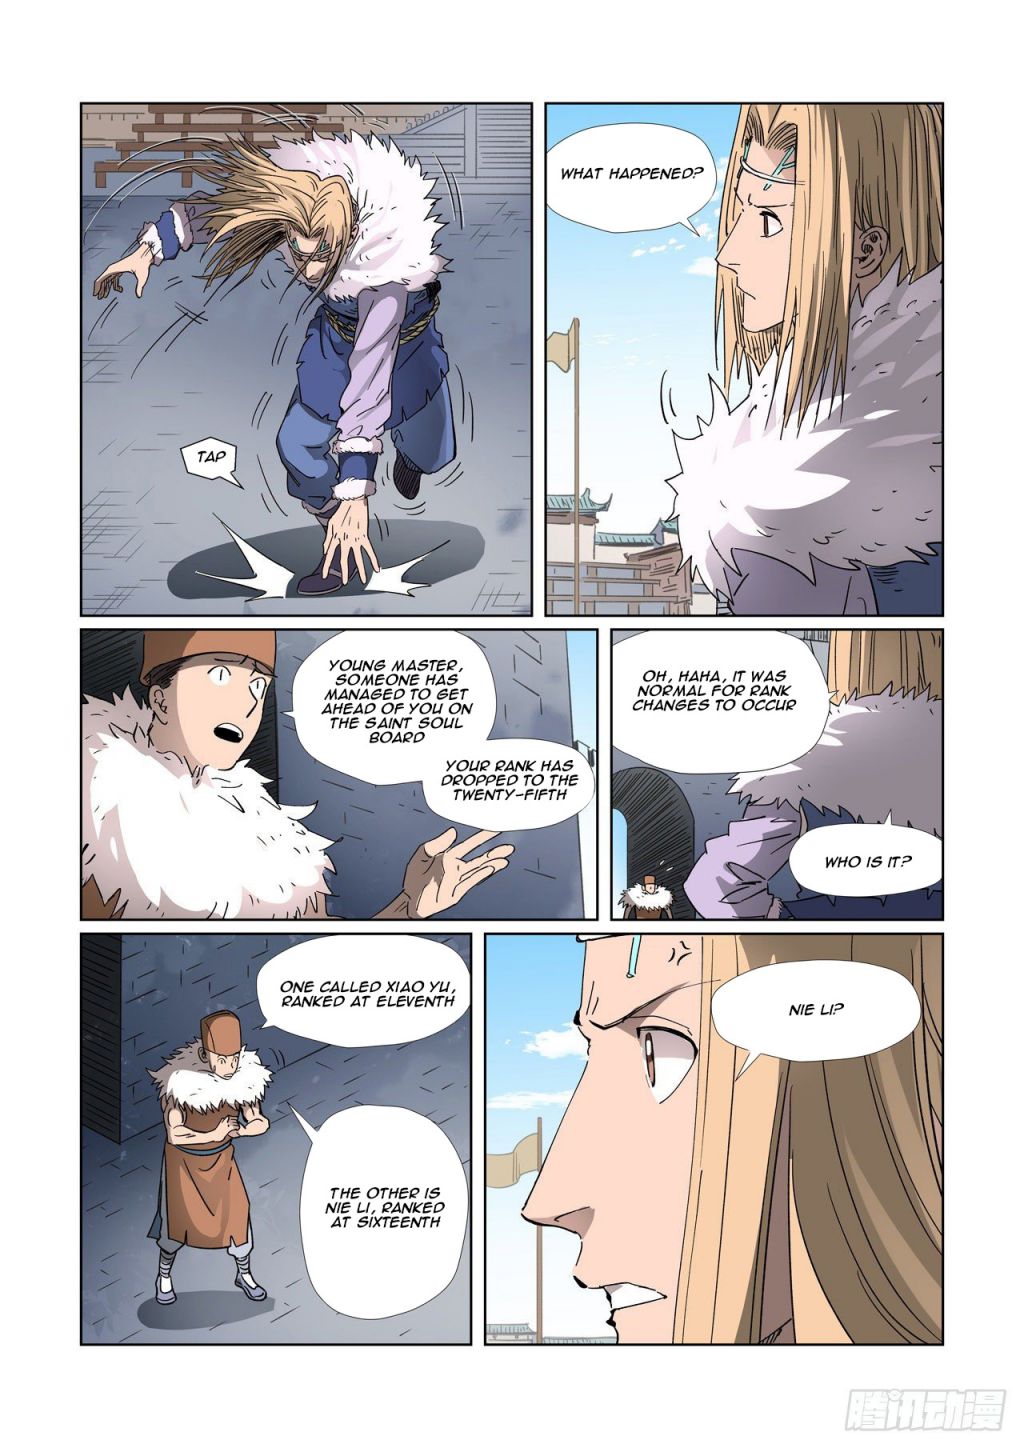 Tales of Demons and Gods chapter 312.5 page 6